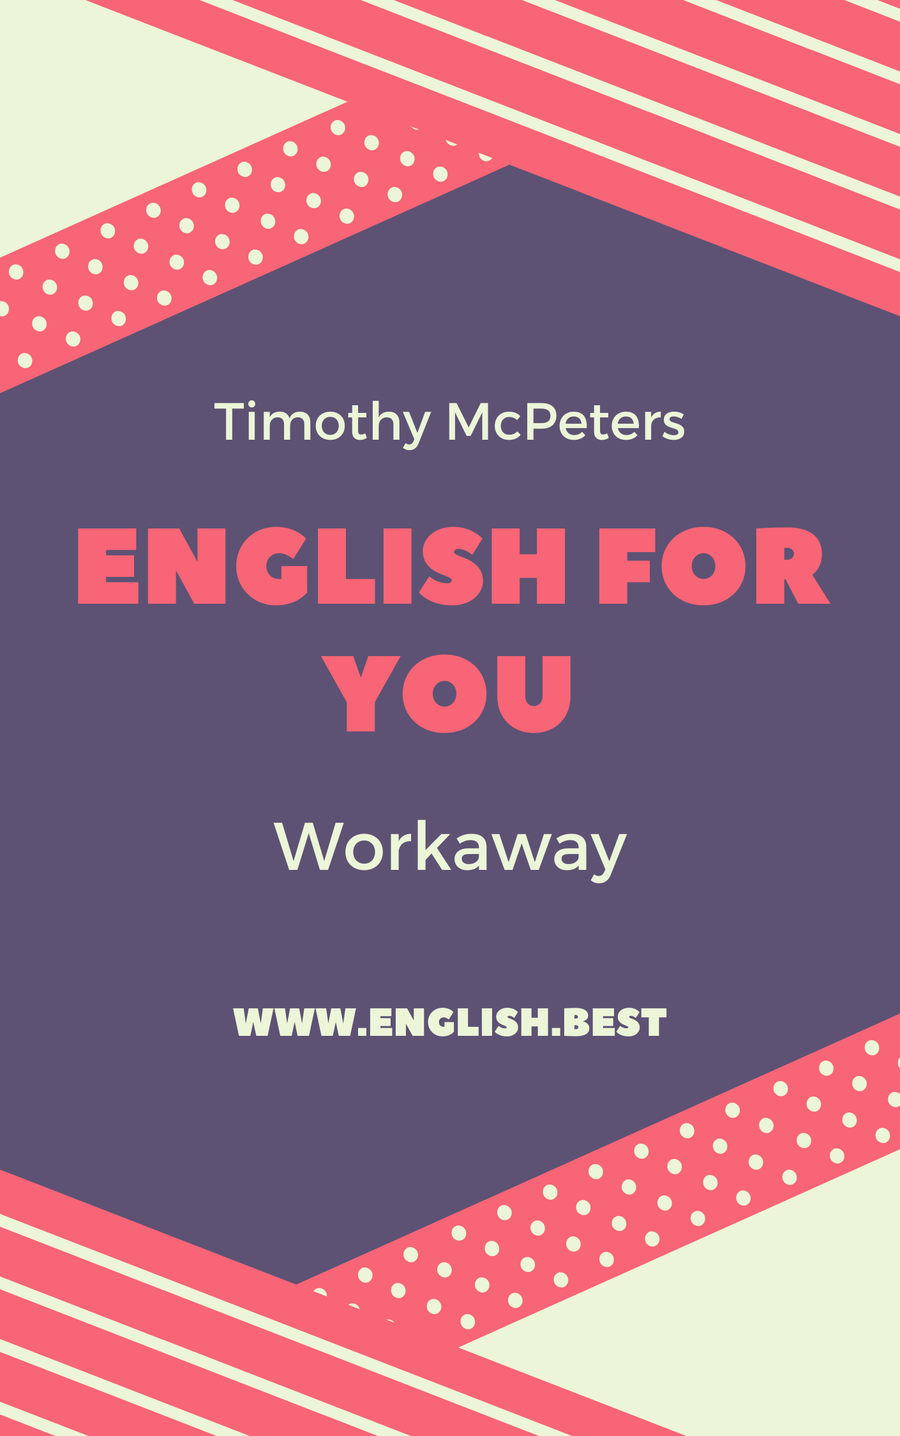 English for you: Workaway